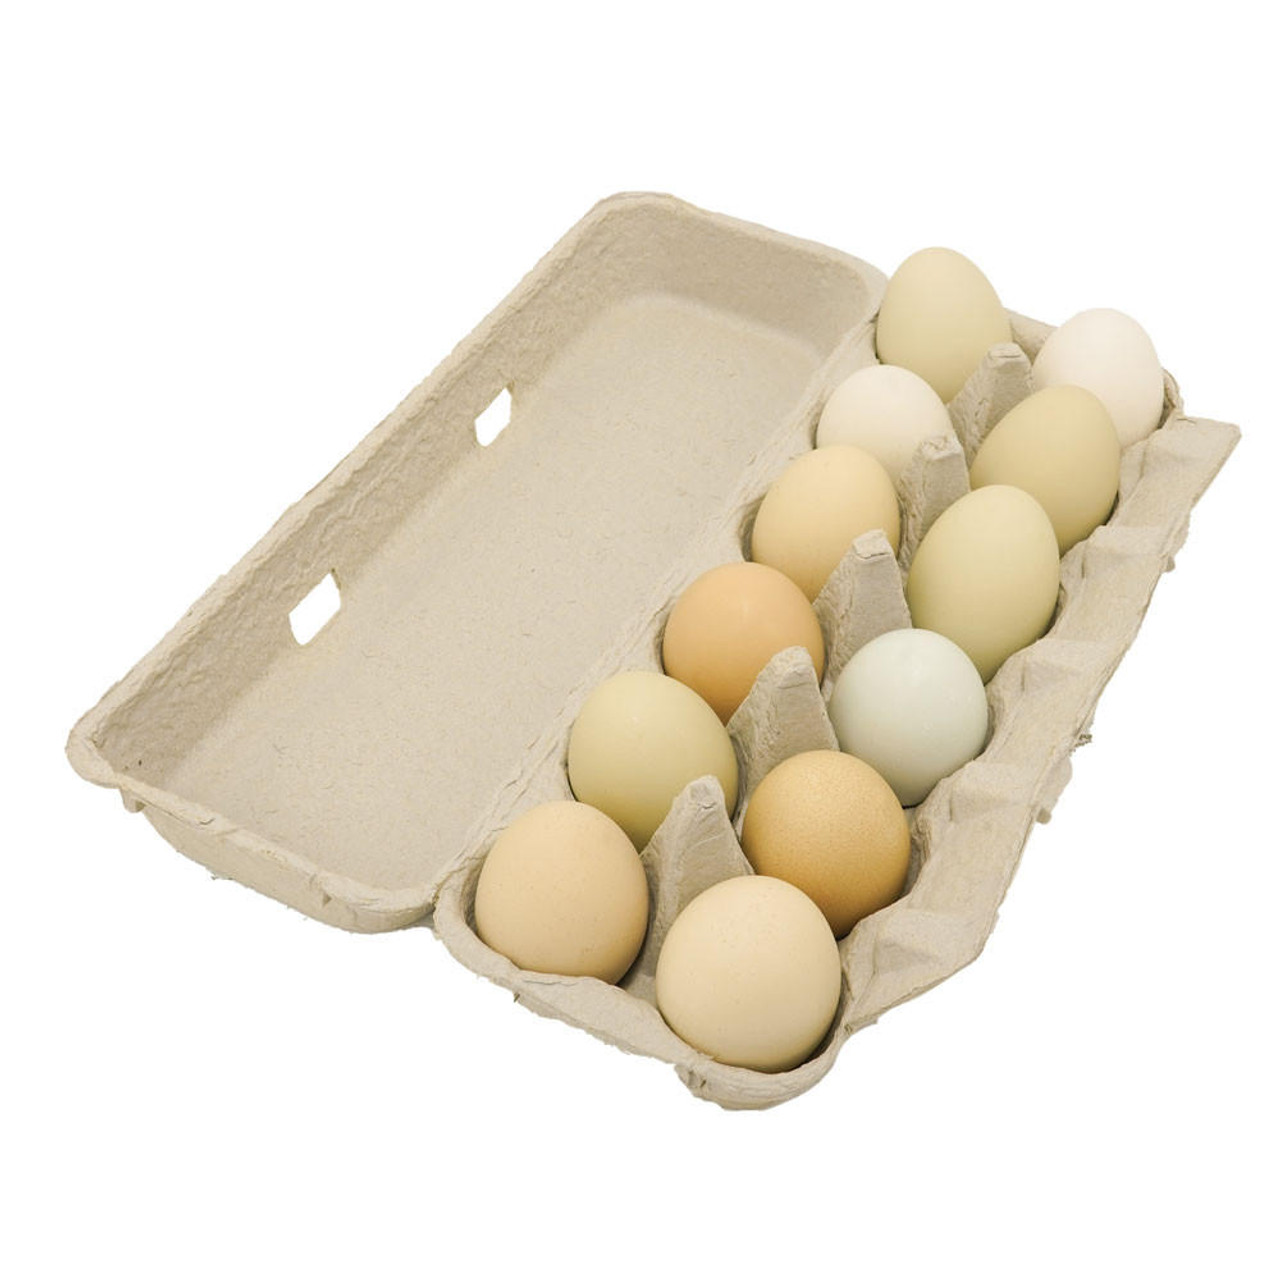 Large Blank Flat Top Chicken Egg Cartons, 100 Pack by Stromberg's